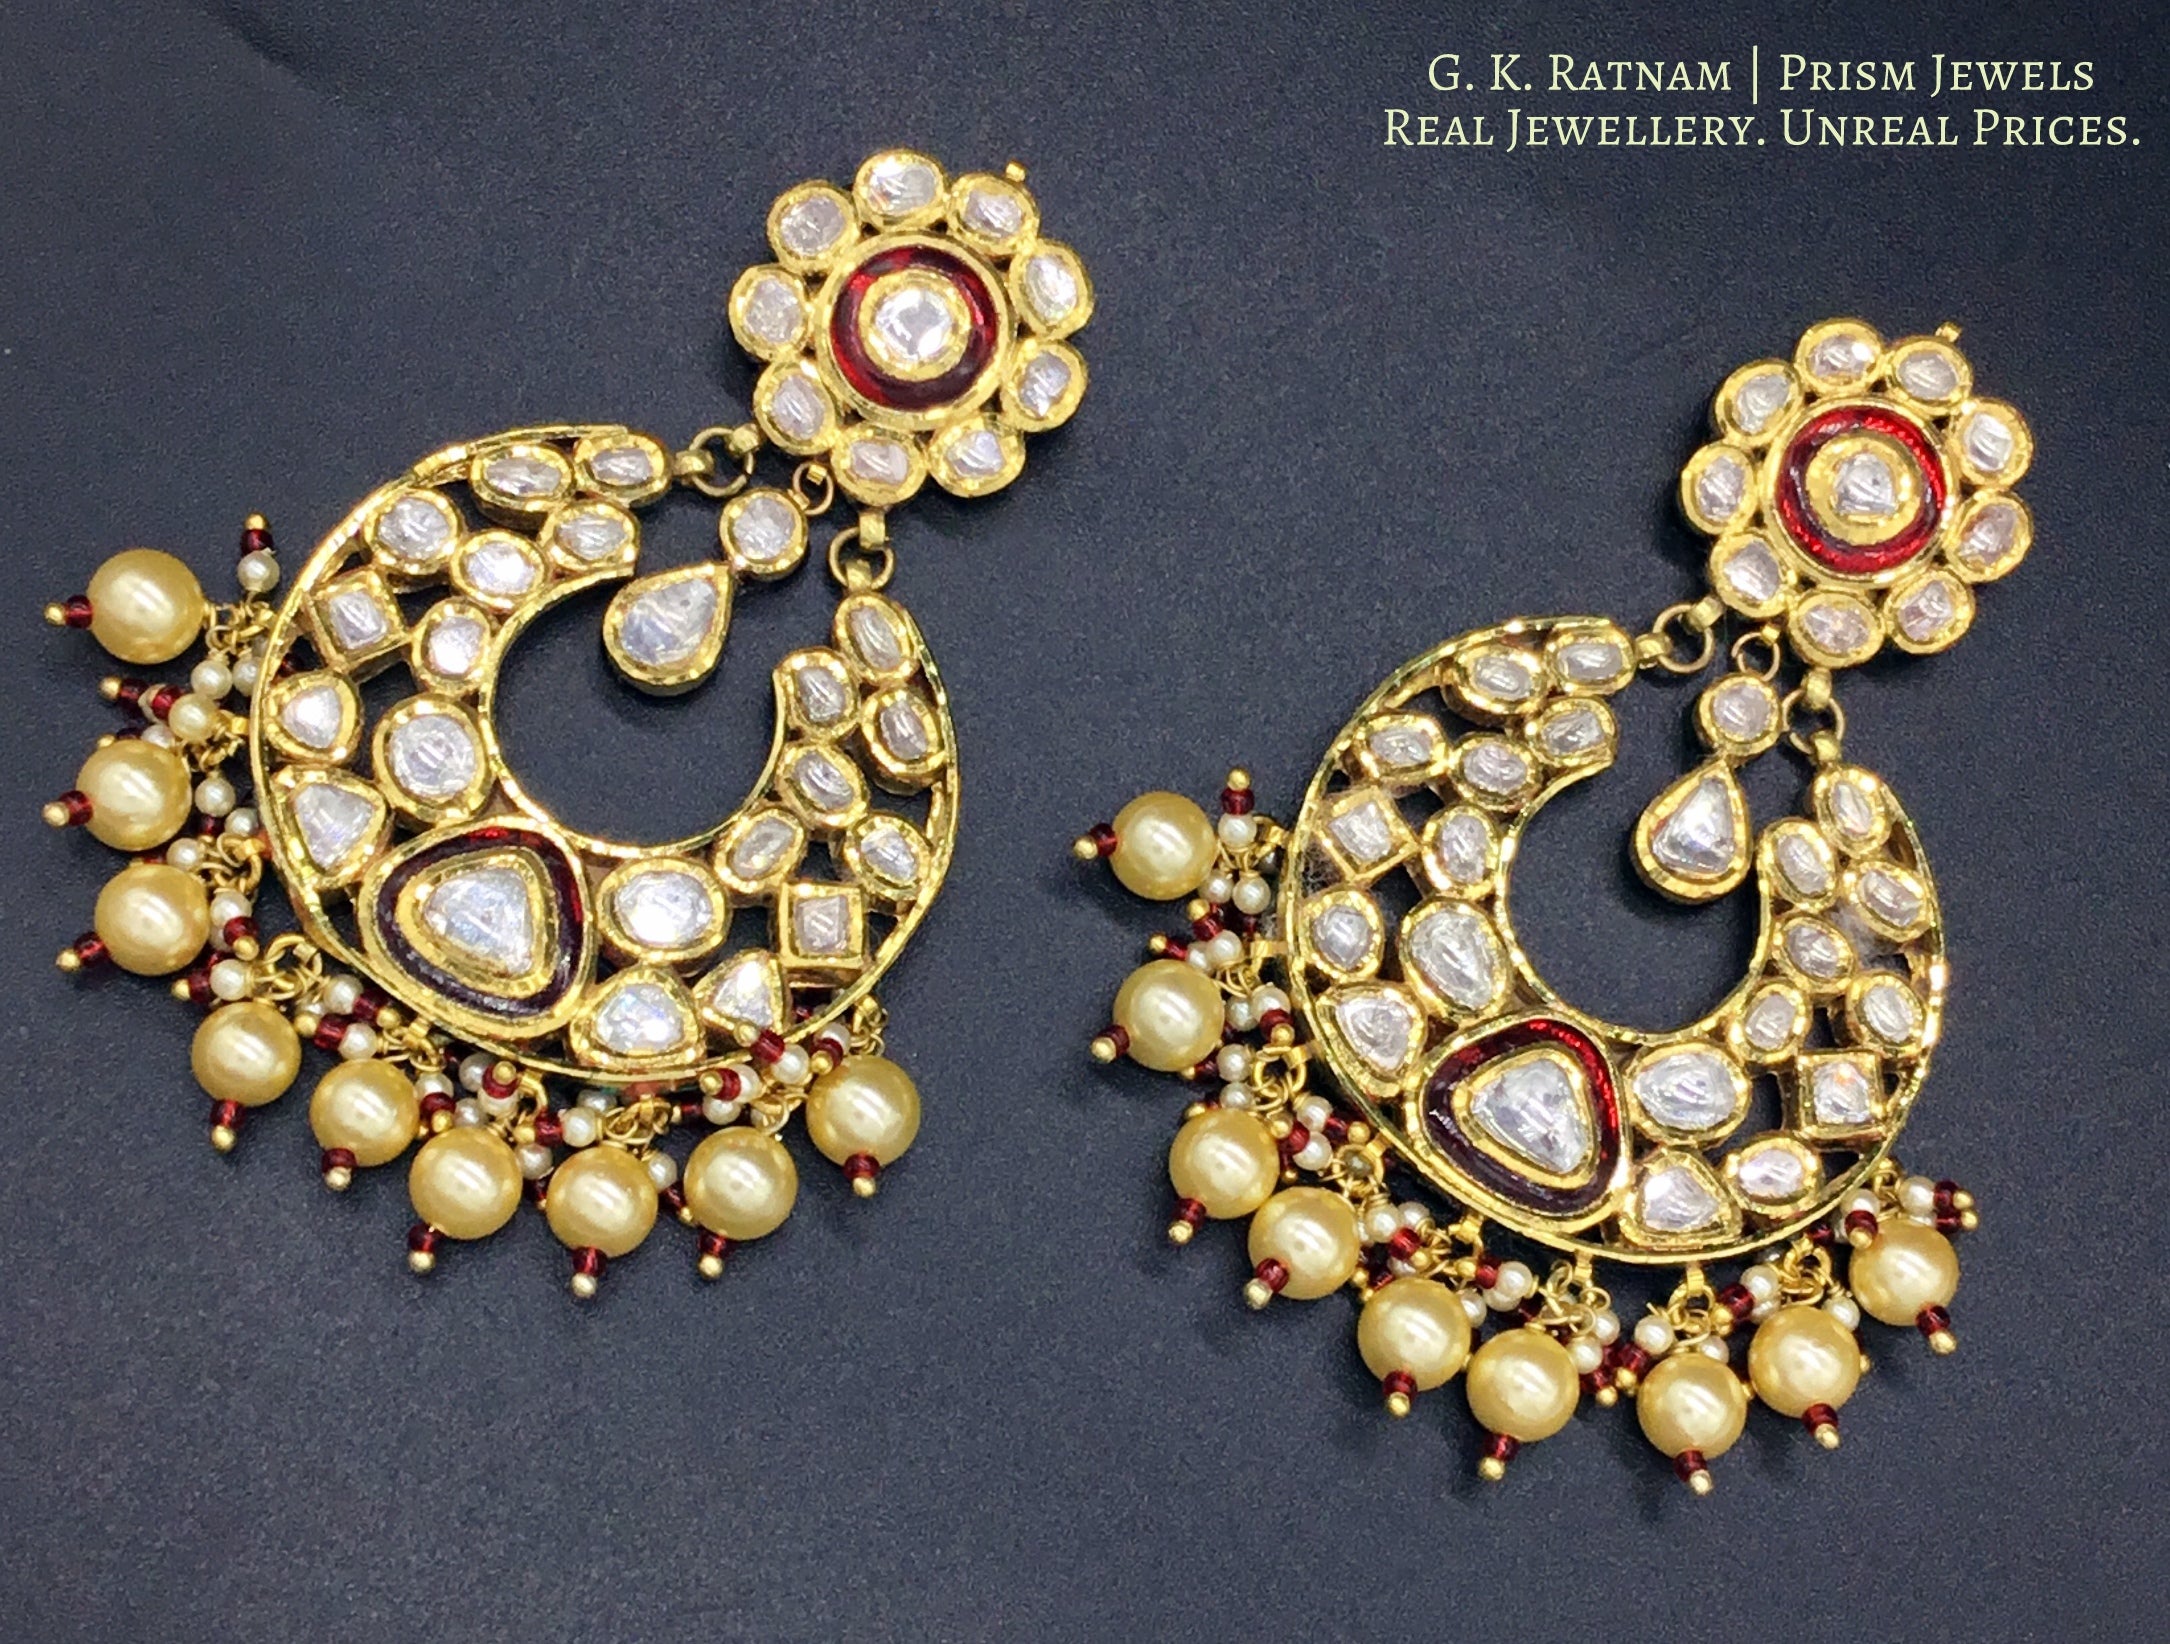 Traditional Gold and Diamond Polki Chand Bali Earring Pair with rubies and pearls strung with a hint of red - gold diamond polki kundan meena jadau jewellery